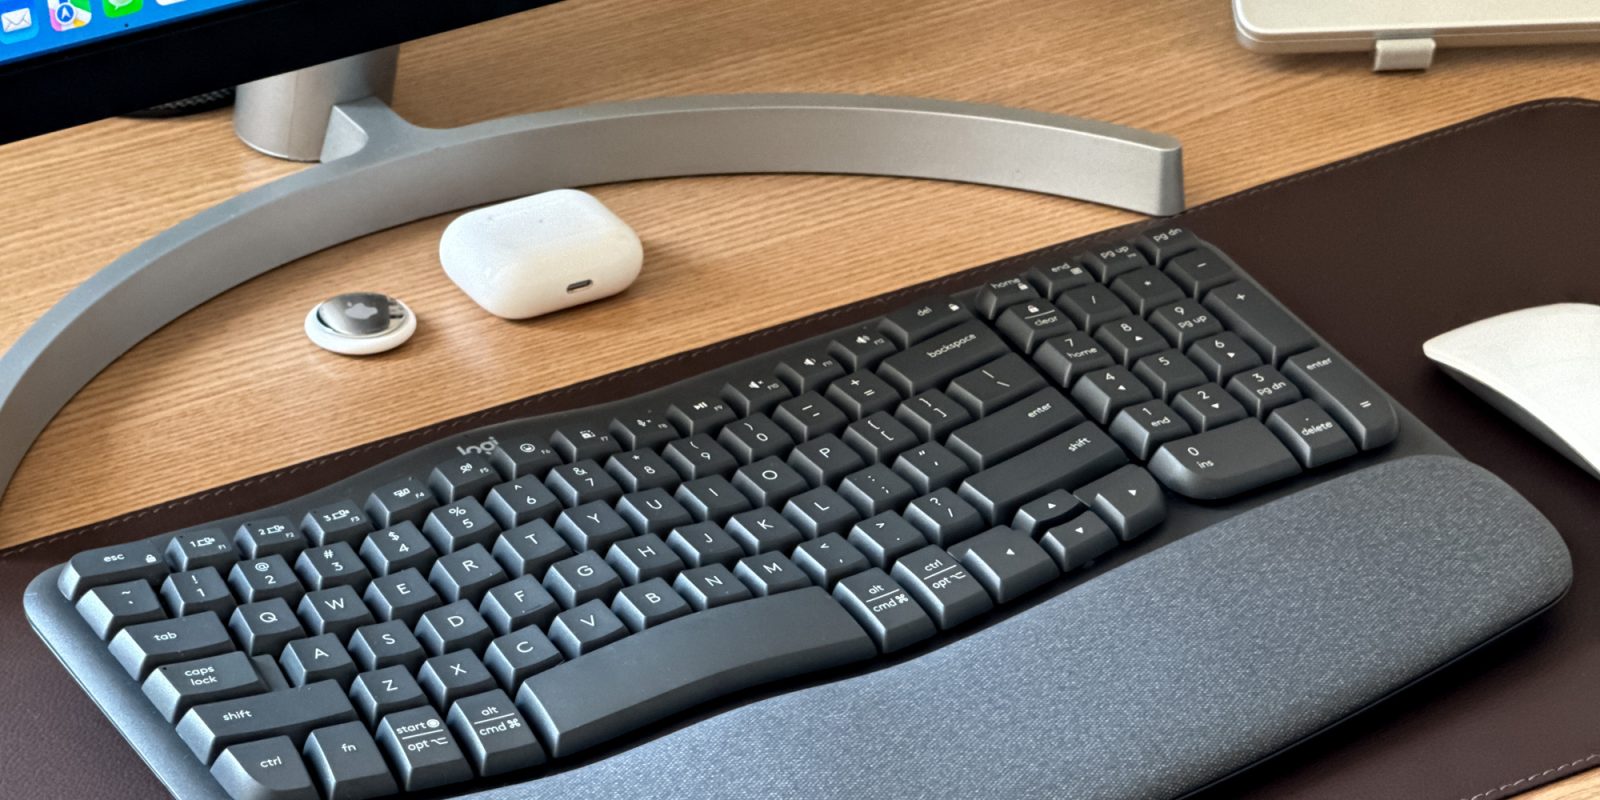 macbook - What is this key on the Microsoft 5050 Keyboard? - Super User